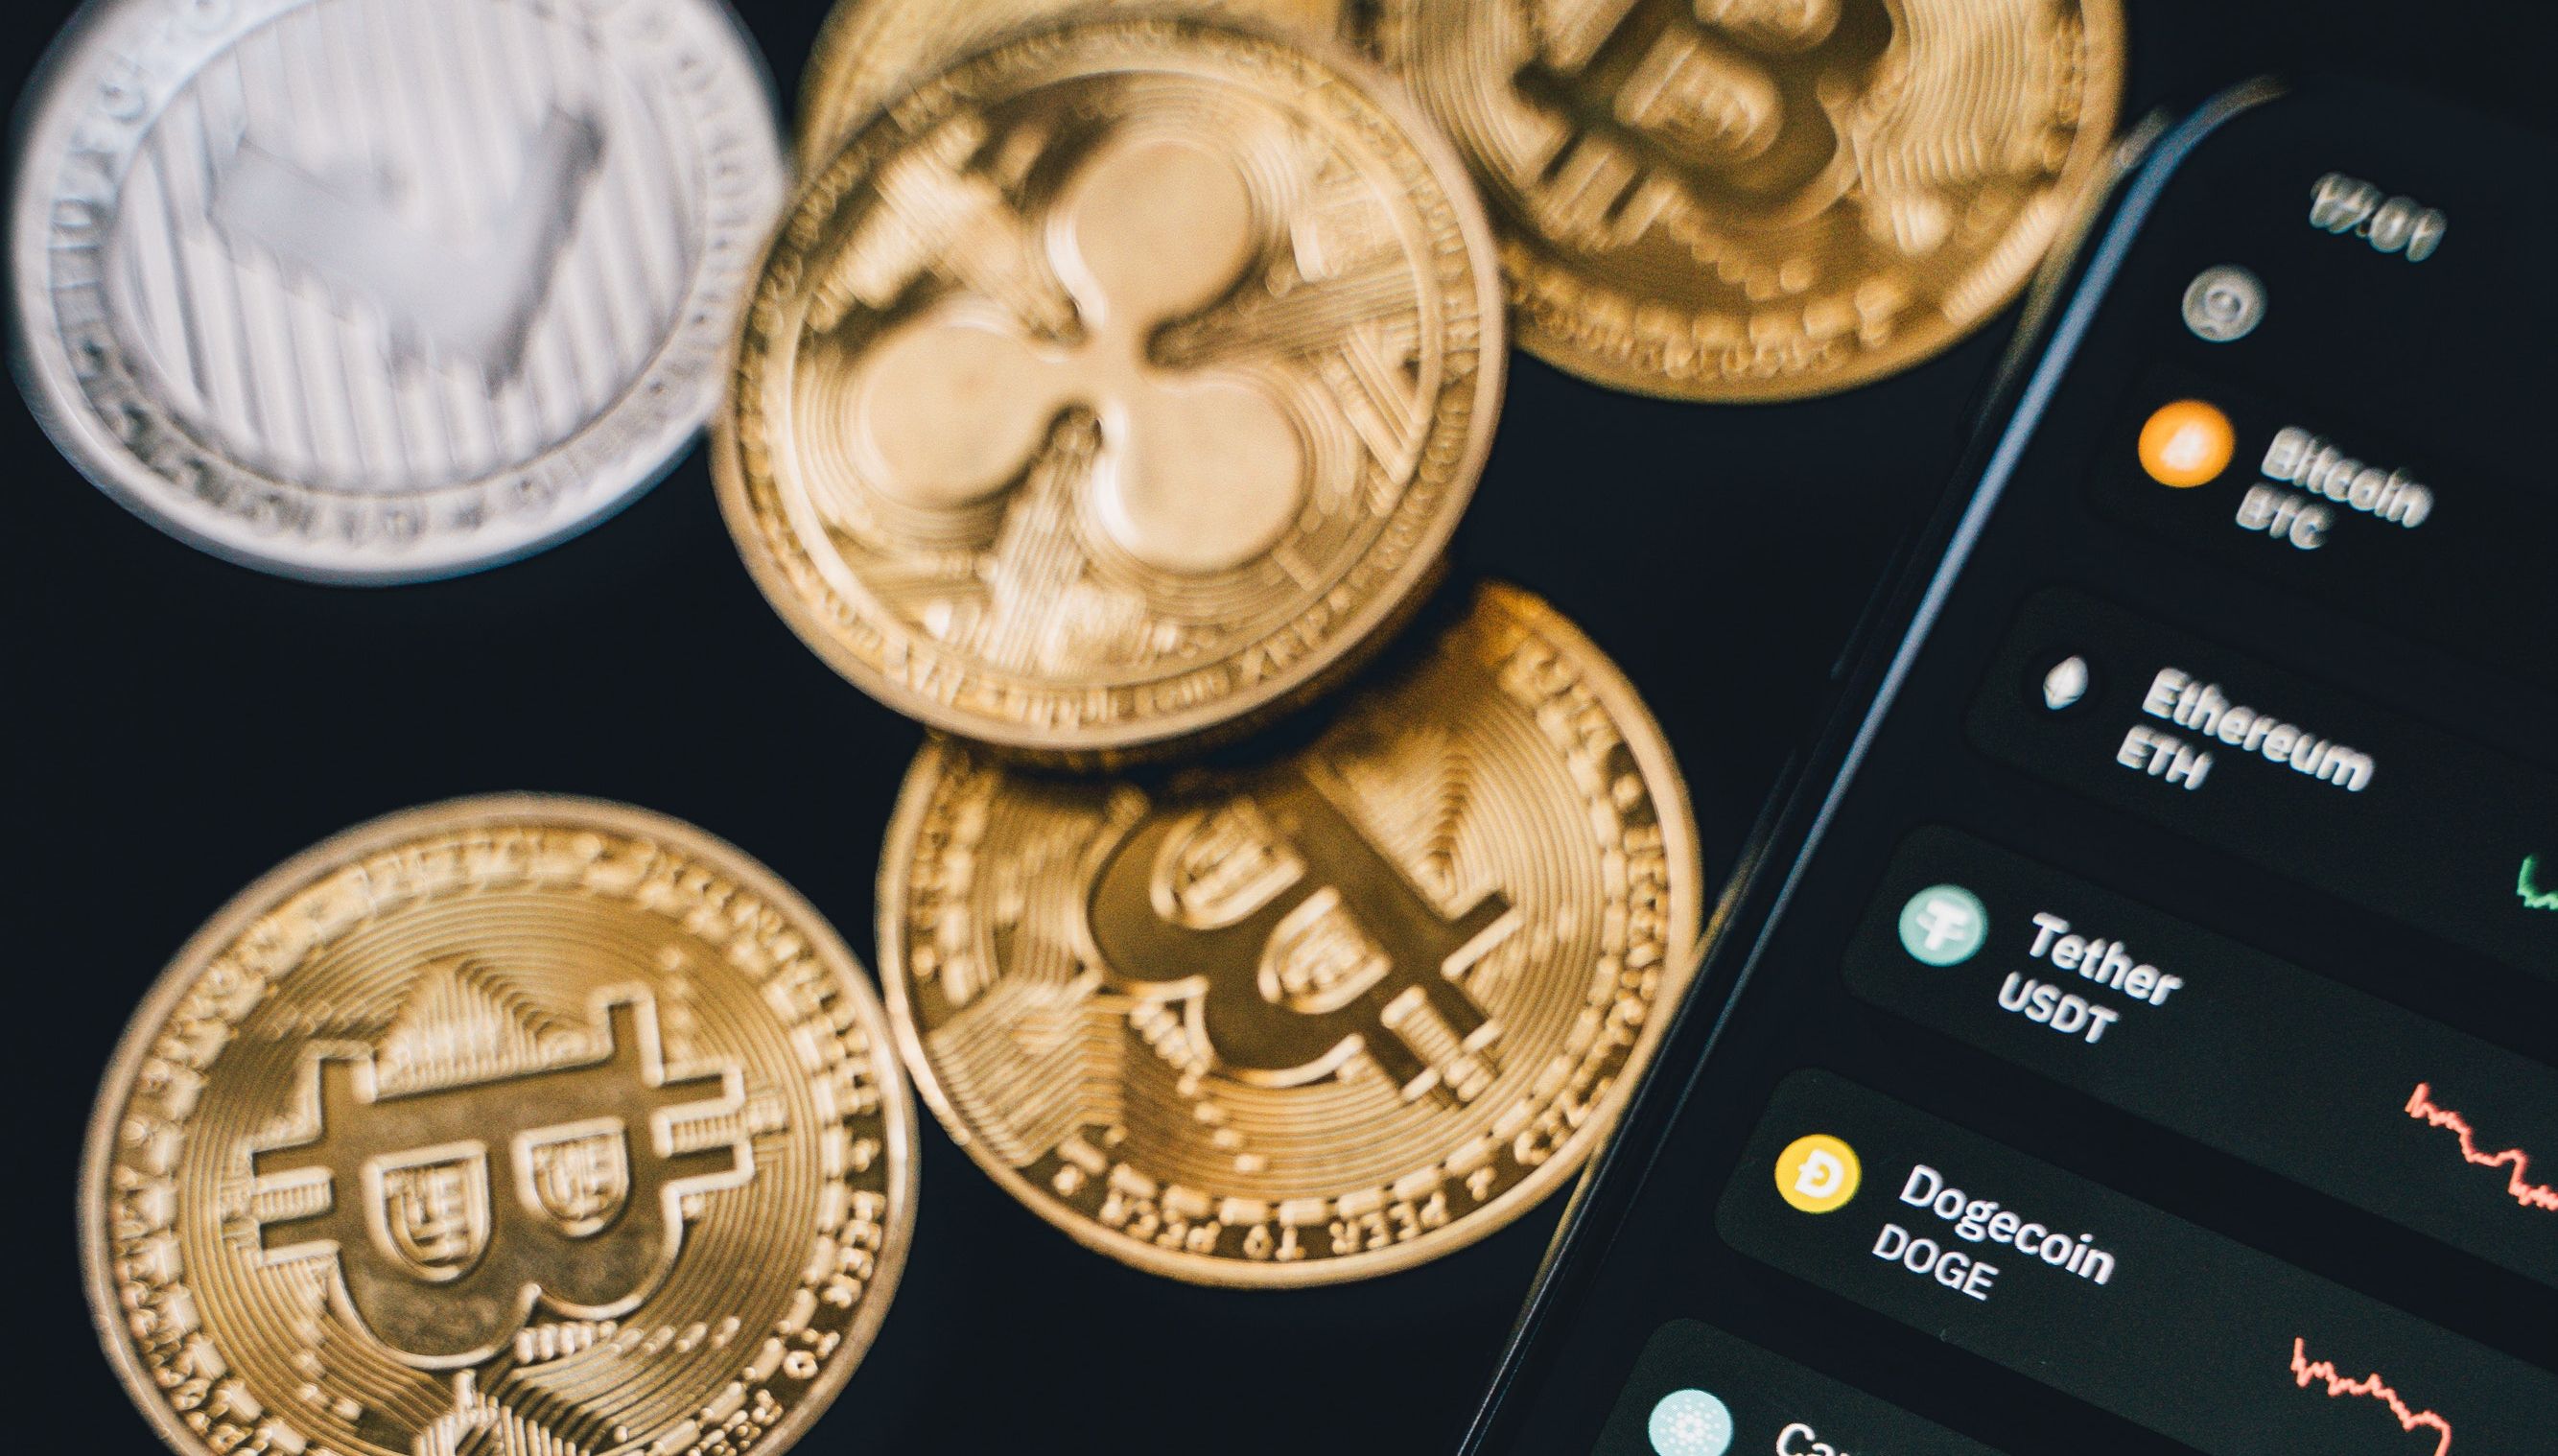 crypto coins next to smartphone displaying crypto statistics